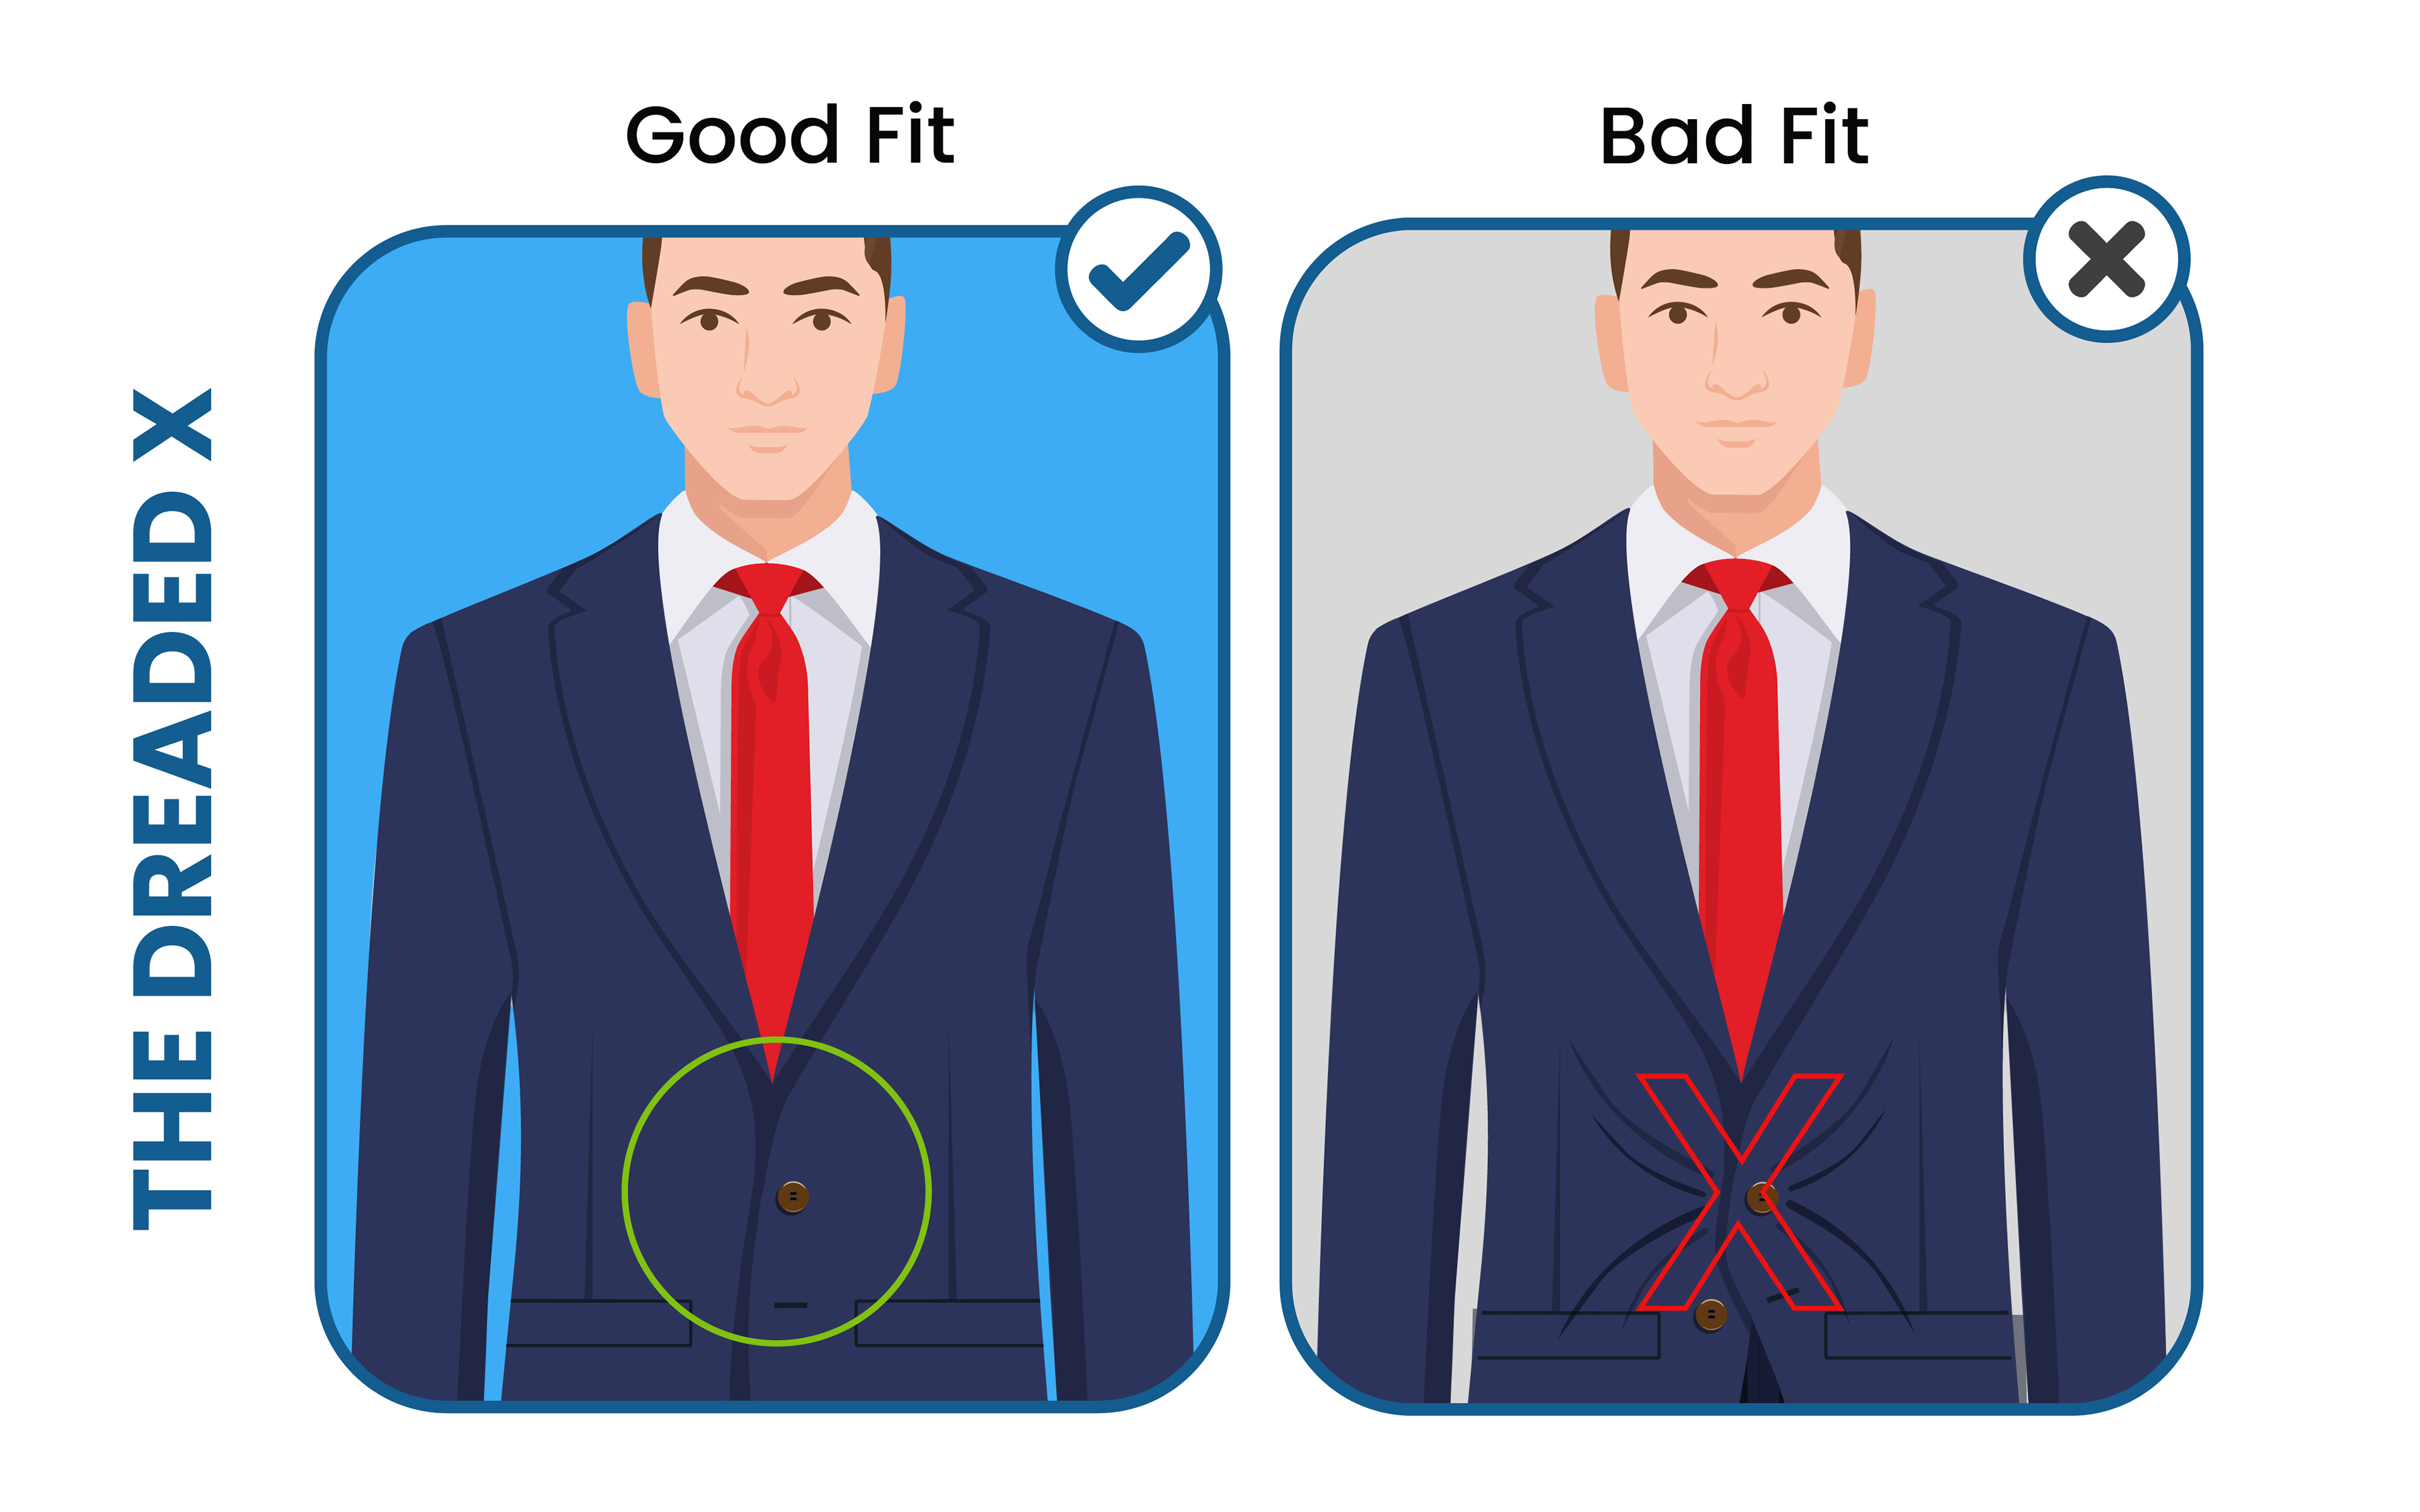 The Perfect Suit for Muscular Men and Bodybuilders - Suits Expert